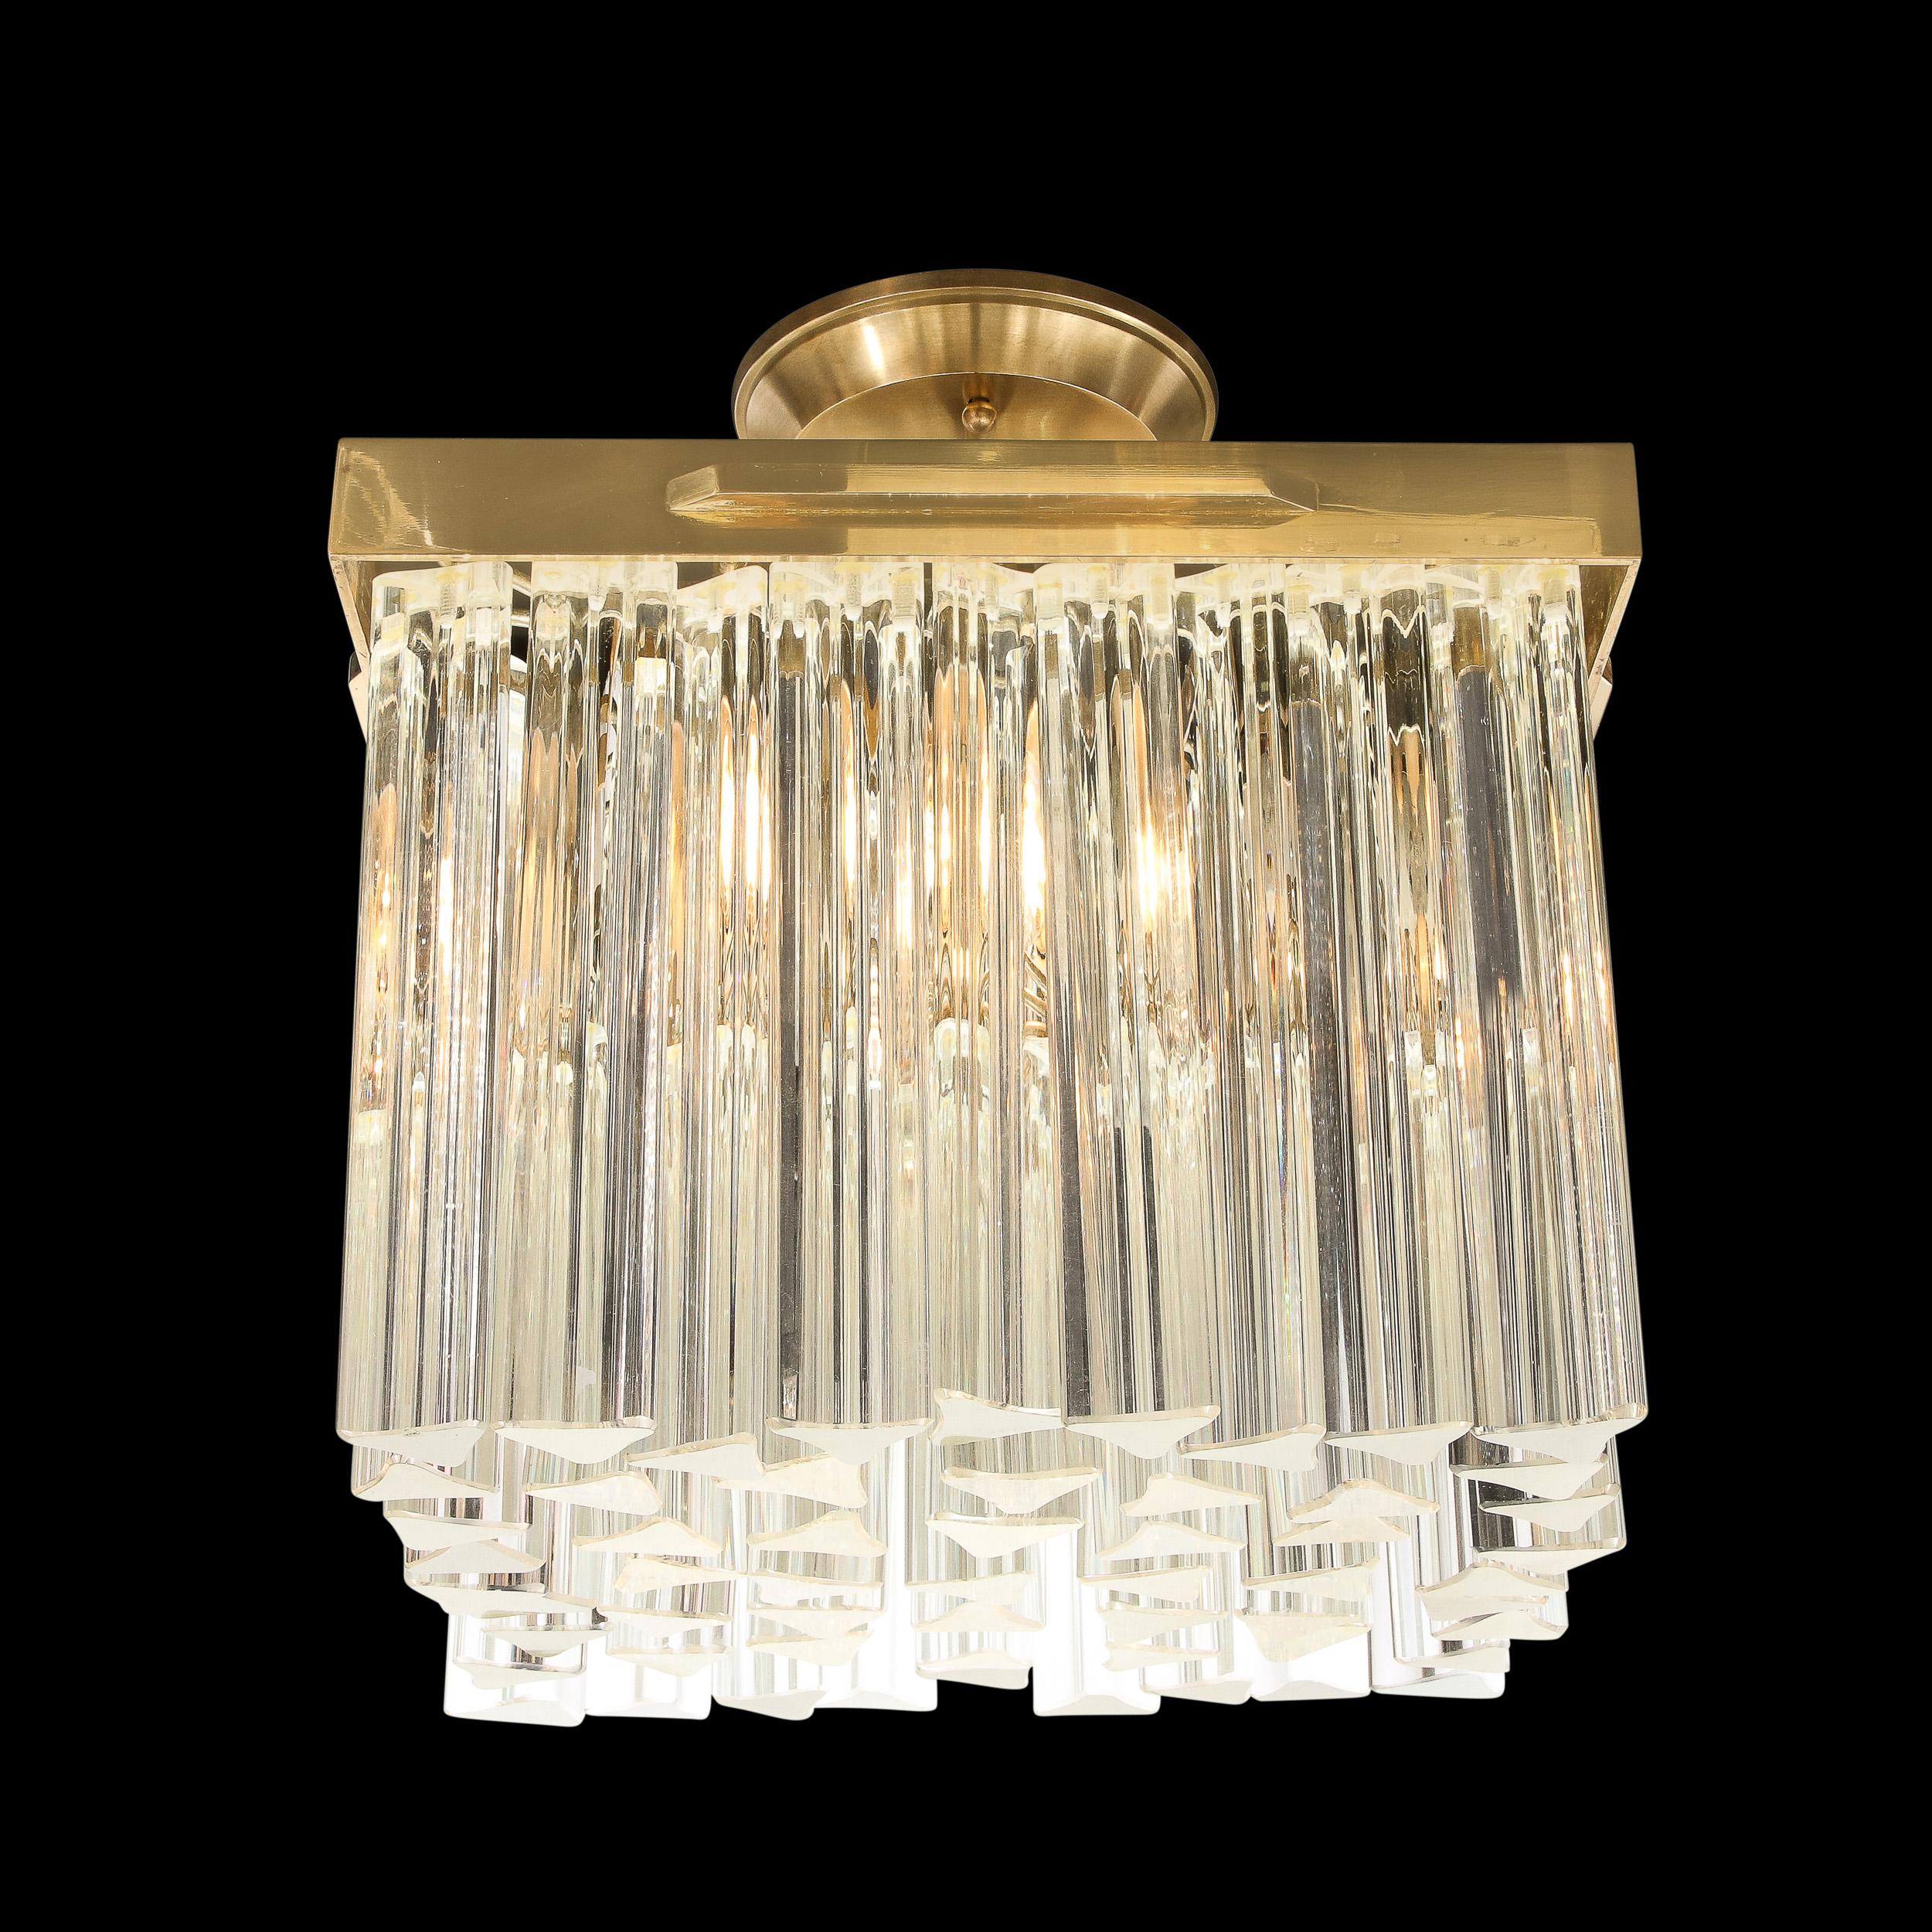 This arresting Mid-Century Modern chandelier was realized in Murano, Italy- the island off the coast of Venice renowned for centuries for its superlative glass production- circa 1975. It features an abundance of camer crystals (one of the most